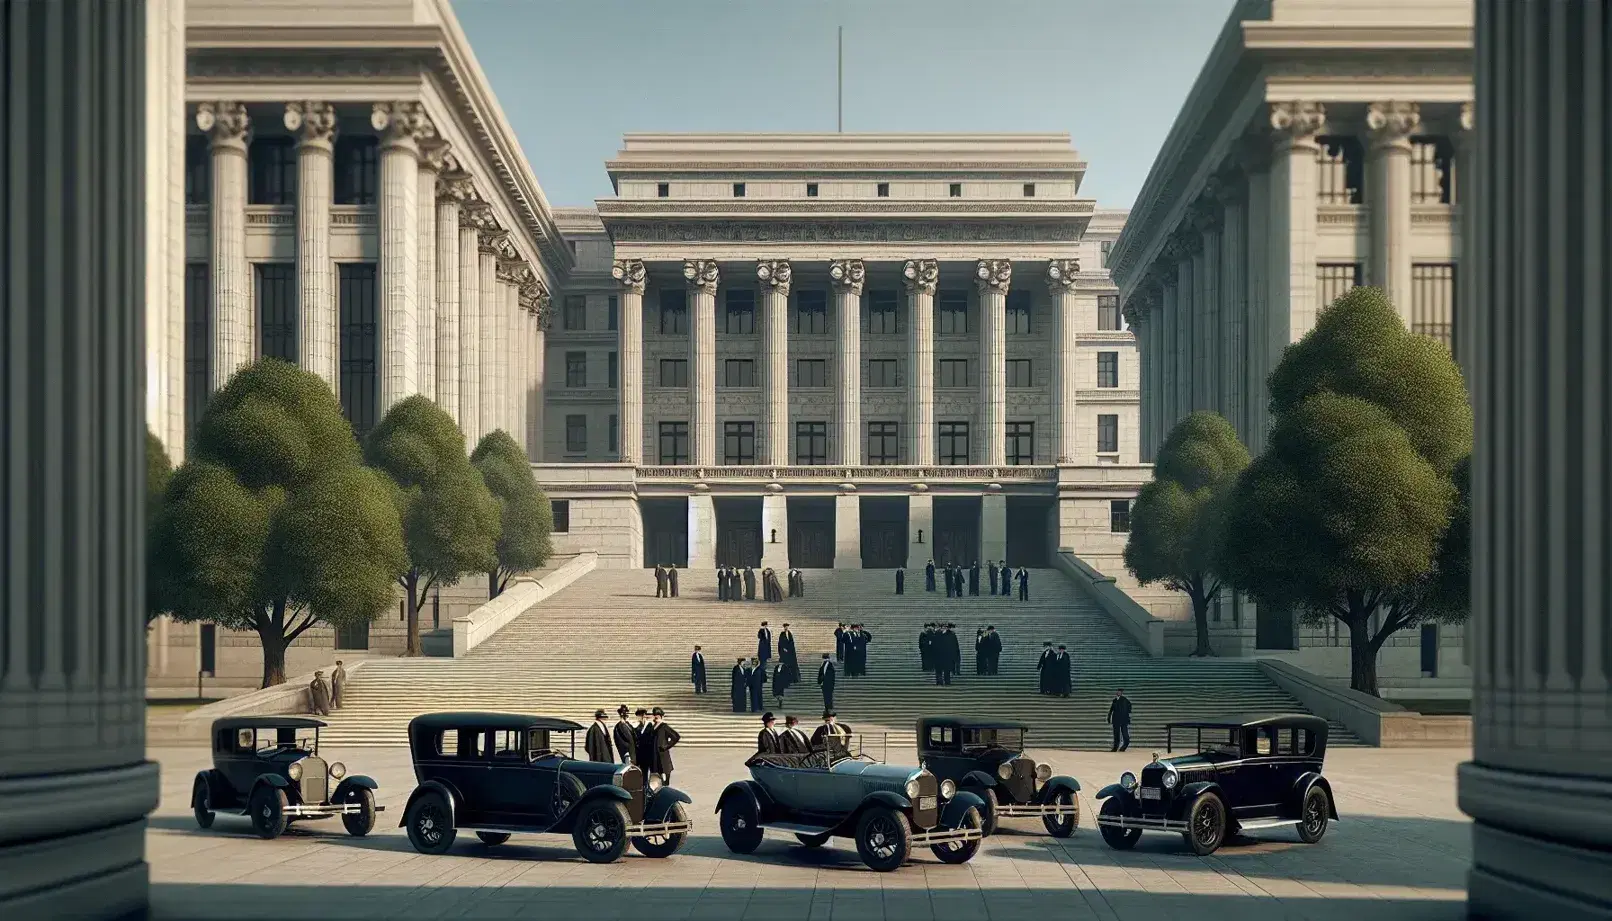 Neoclassical government building with towering columns, marble facade, and 1920s cars parked by a tree-lined street, with men in period attire conversing on the steps.